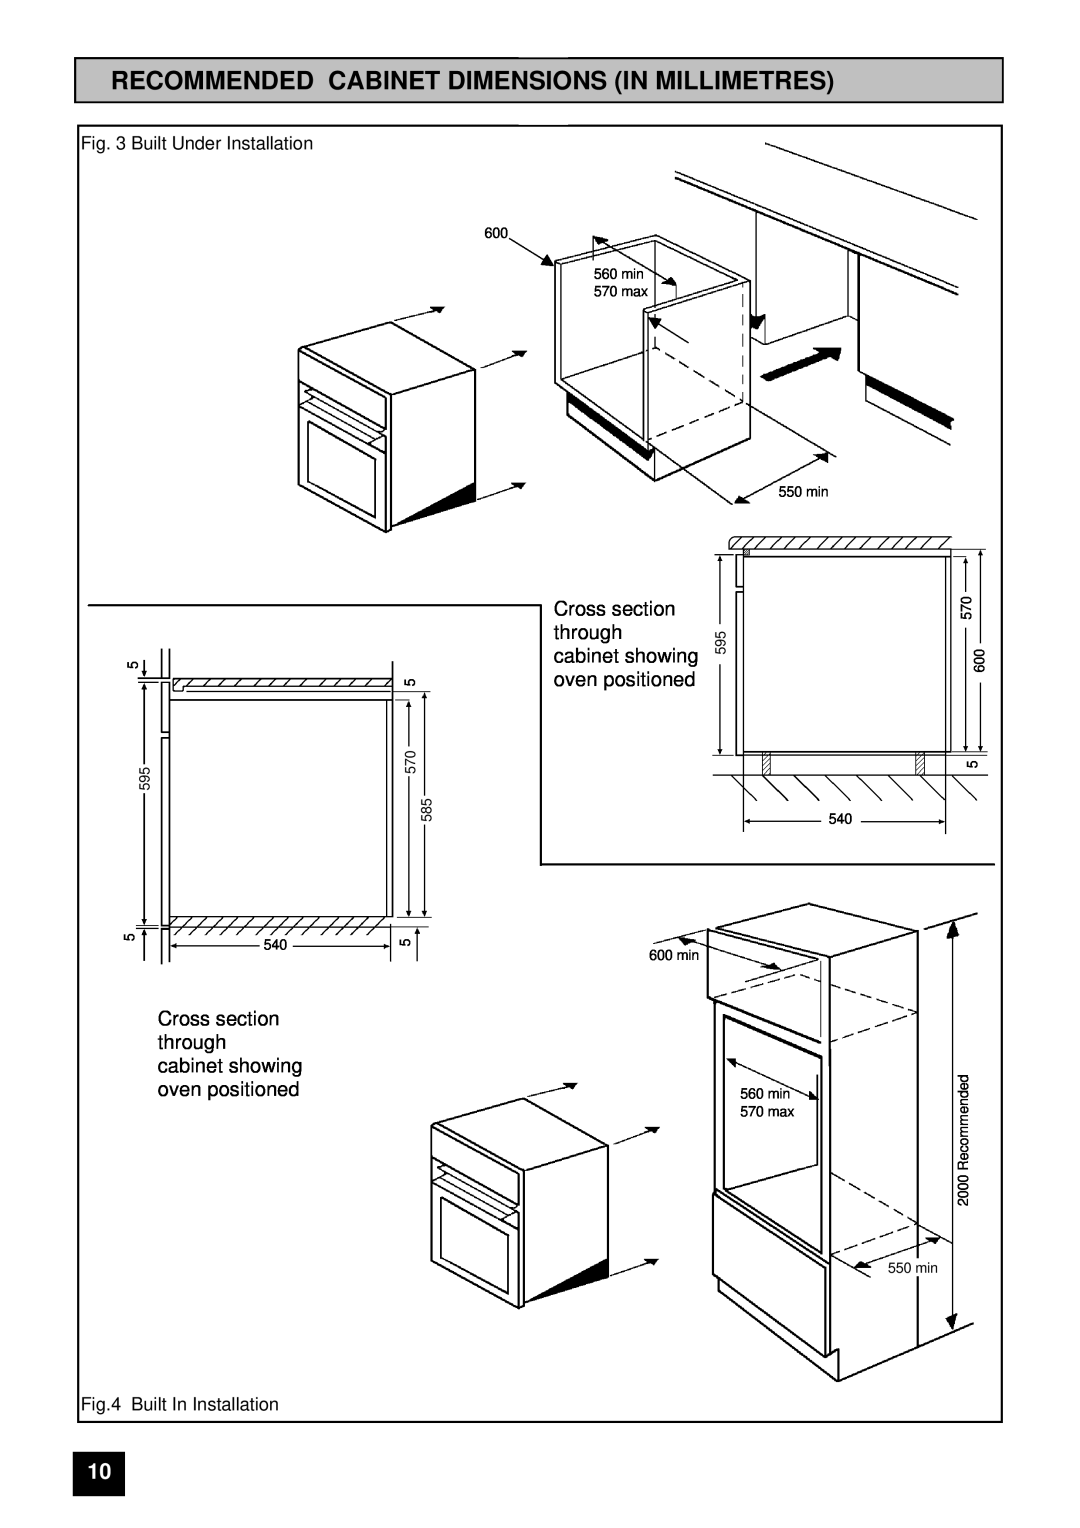 Tricity Bendix BS 611/BS 621 Recommended Cabinet Dimensions In Millimetres, Cross section, through, cabinet showing 